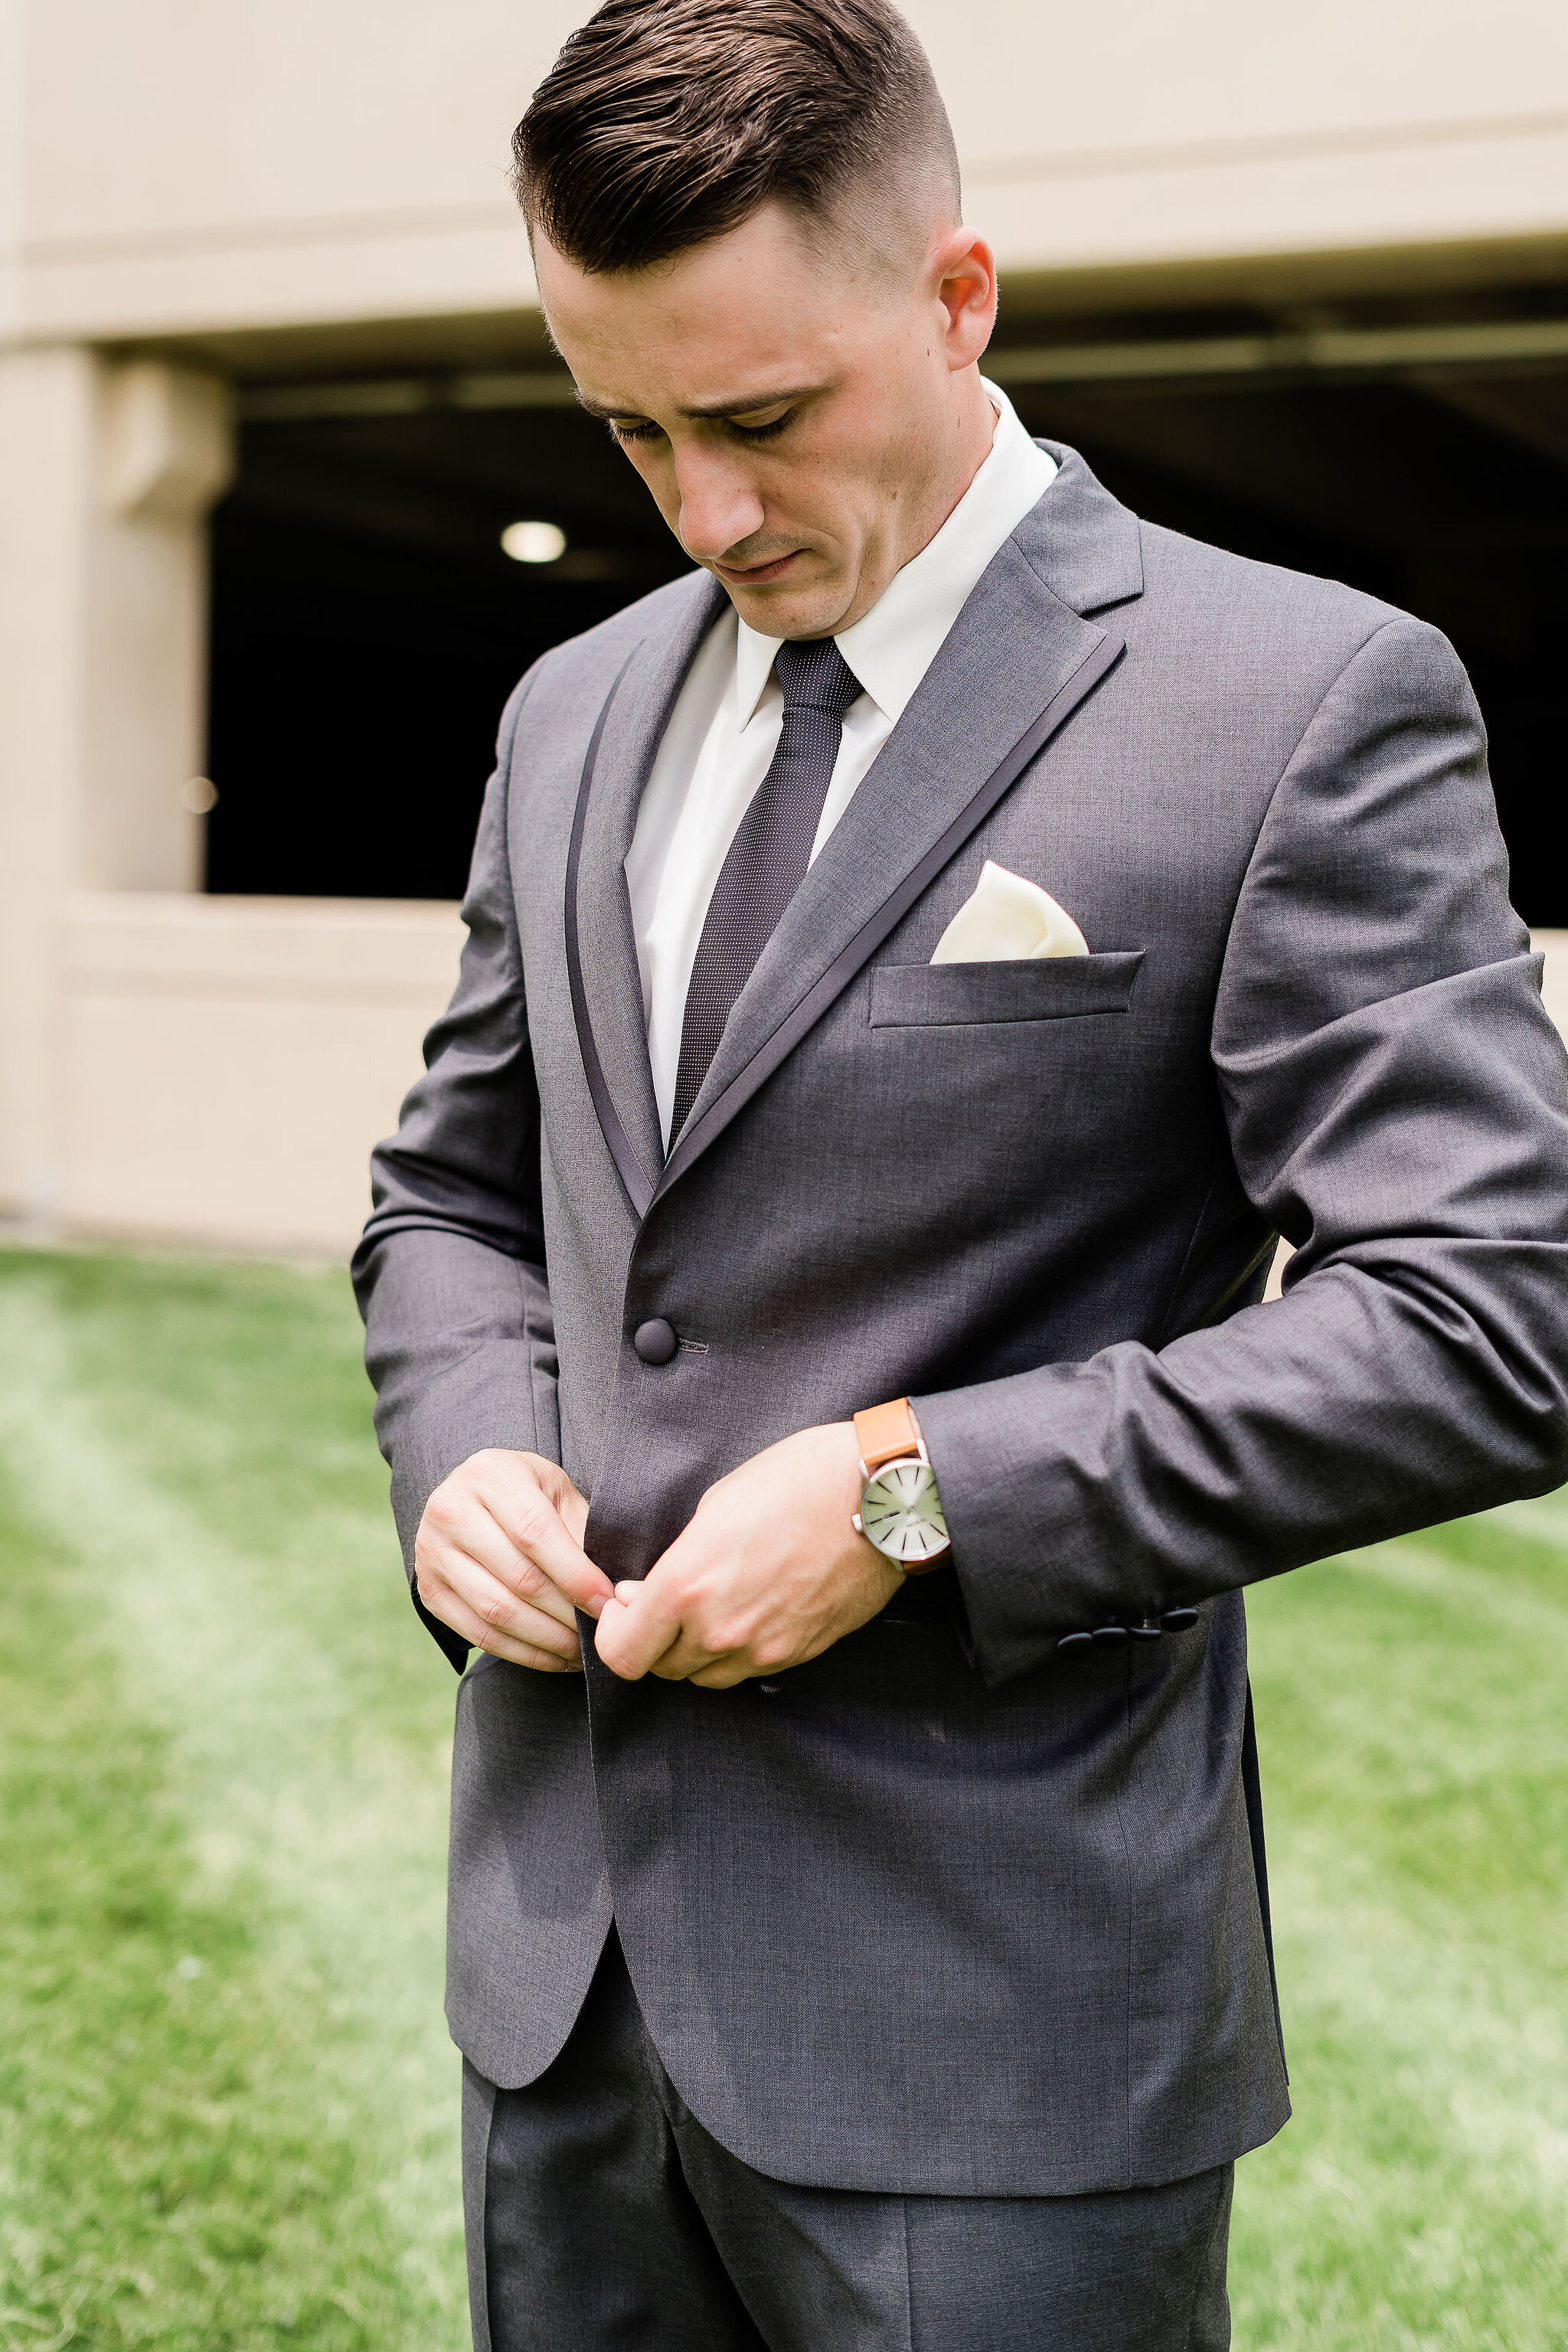 Groom buttoning his suit jacket